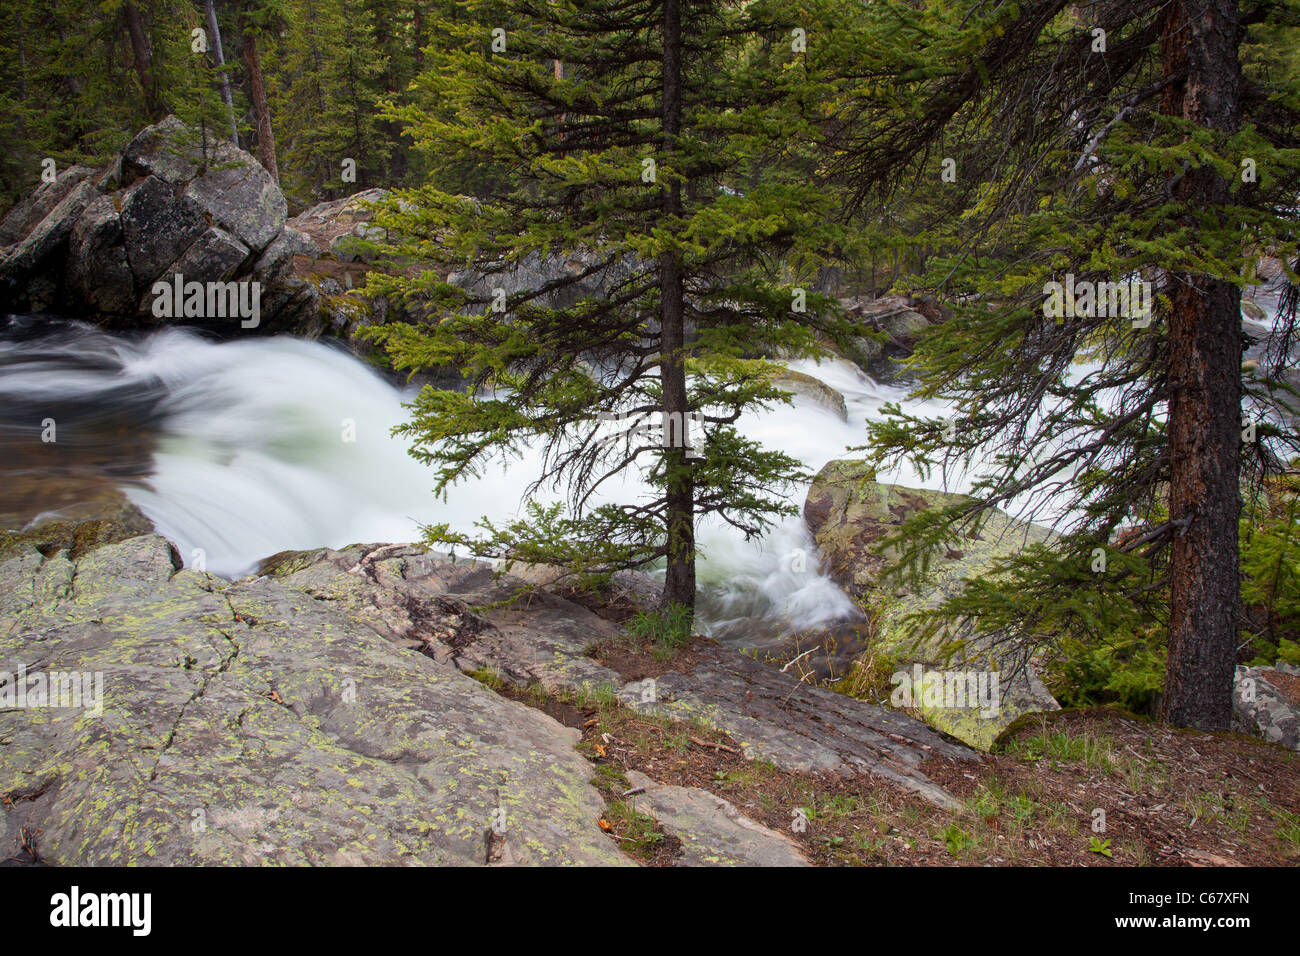 Middle Tensleep Creek, Bighorn National Forest, Wyoming Stock Photo